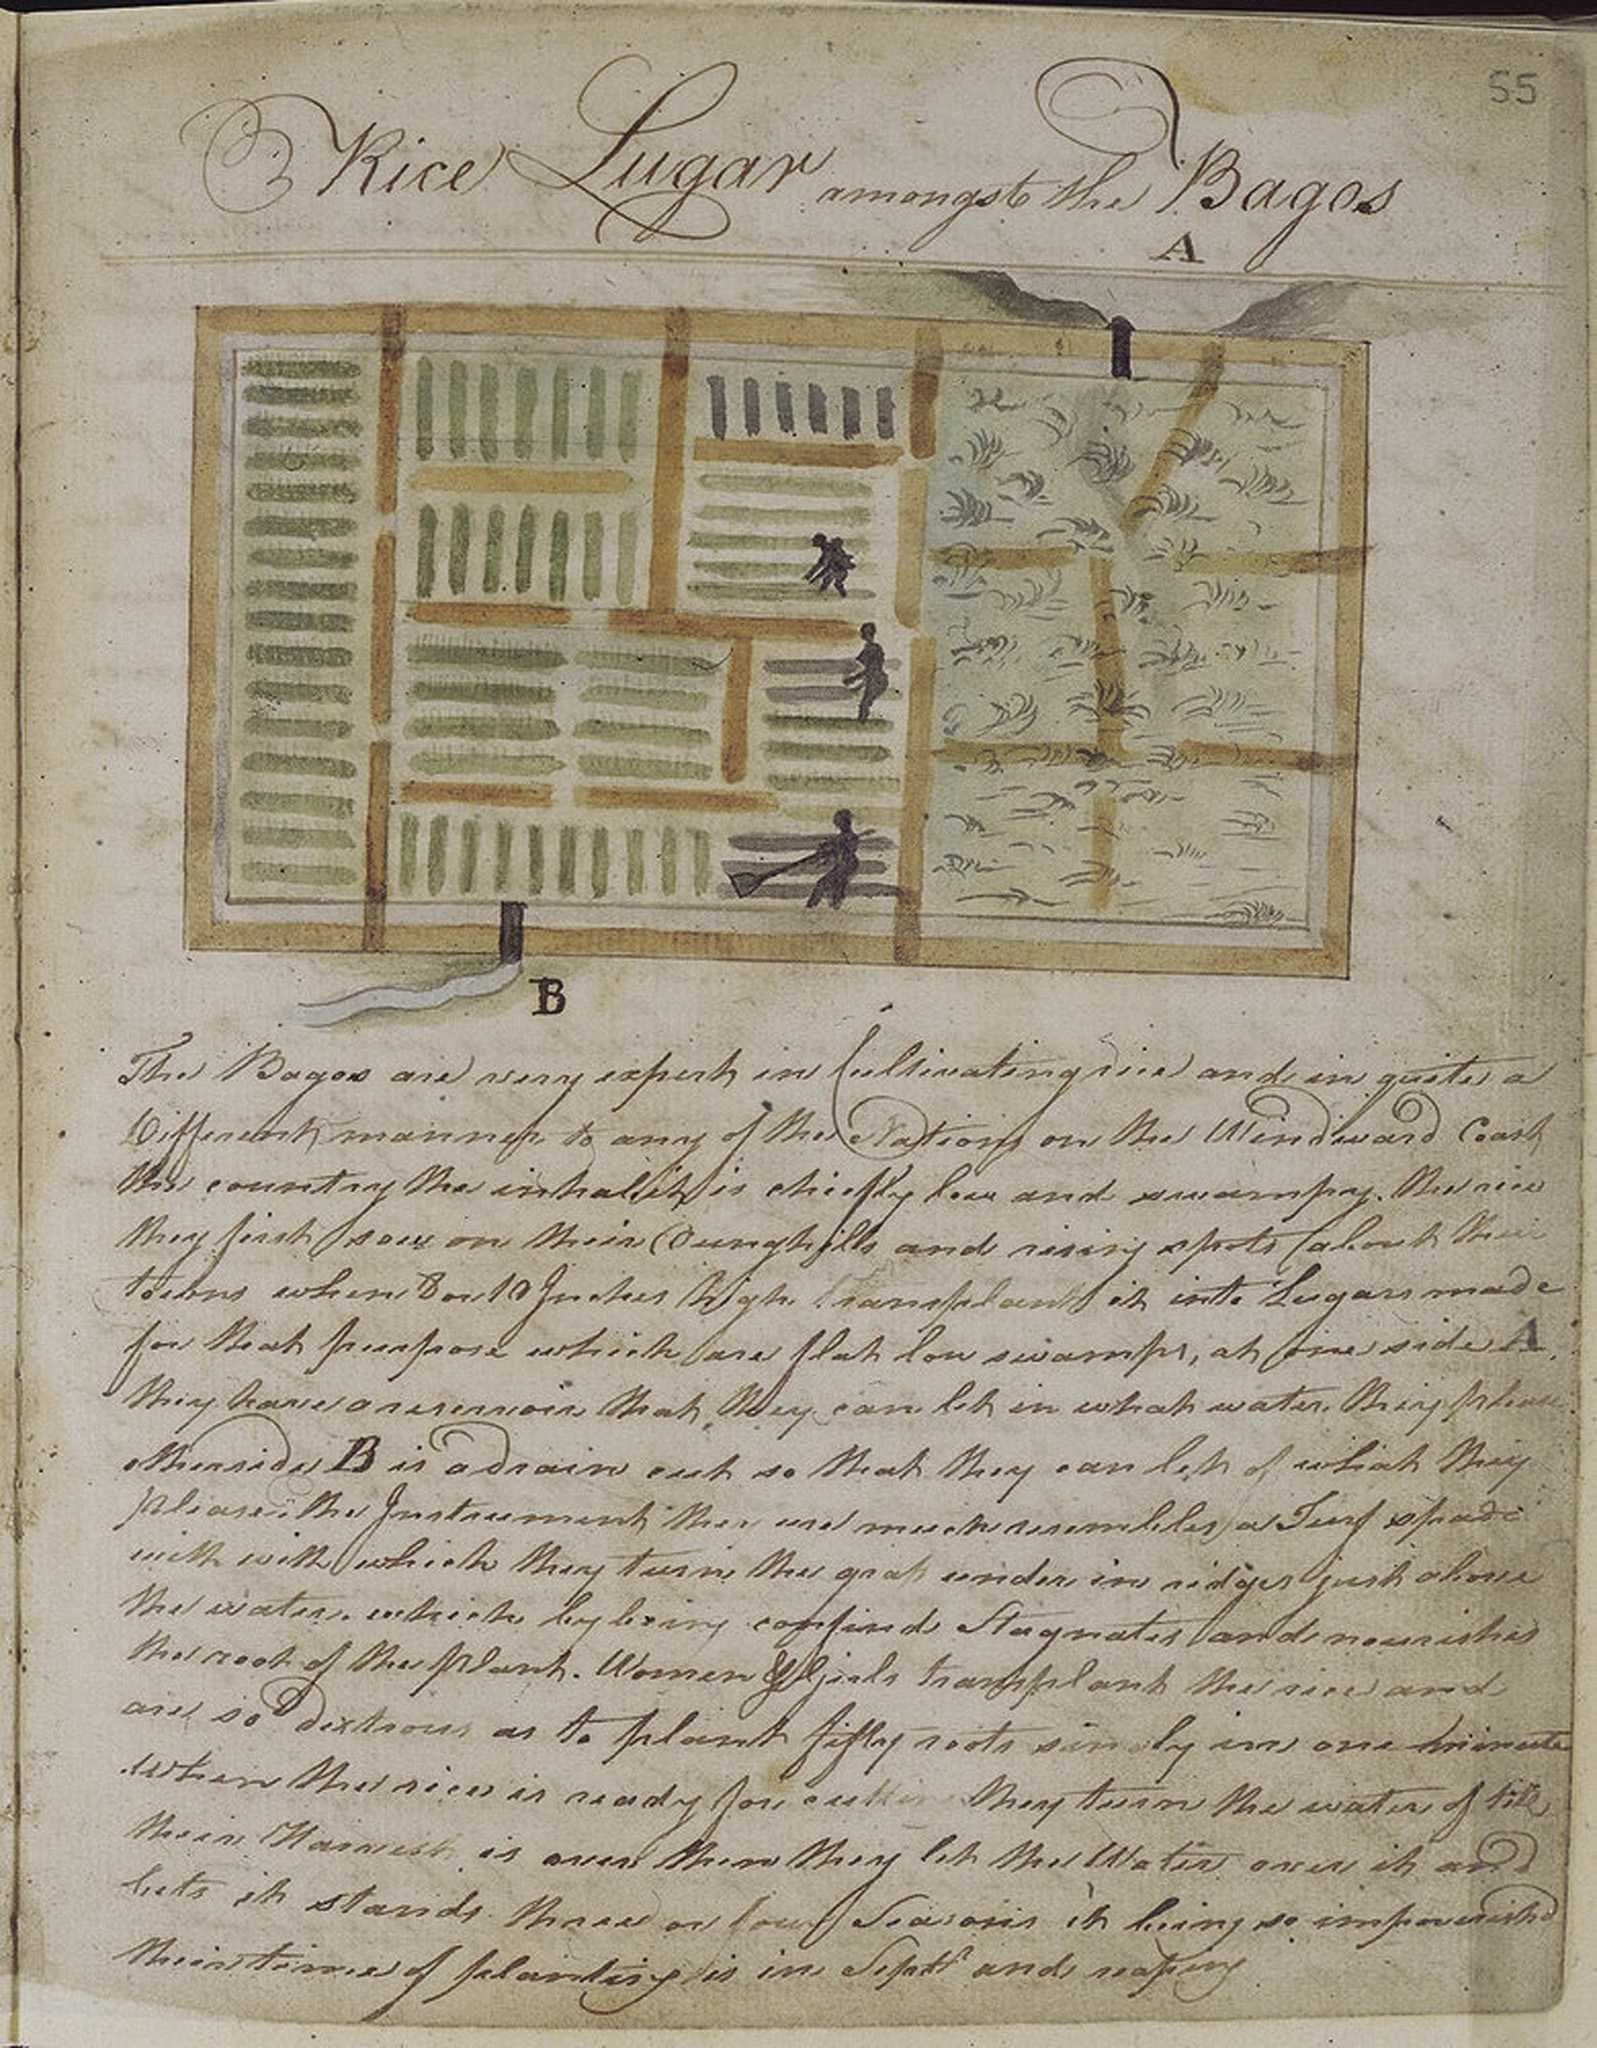 Illustration and description of Baga rice cultivation from the log of the slave ship Sandown